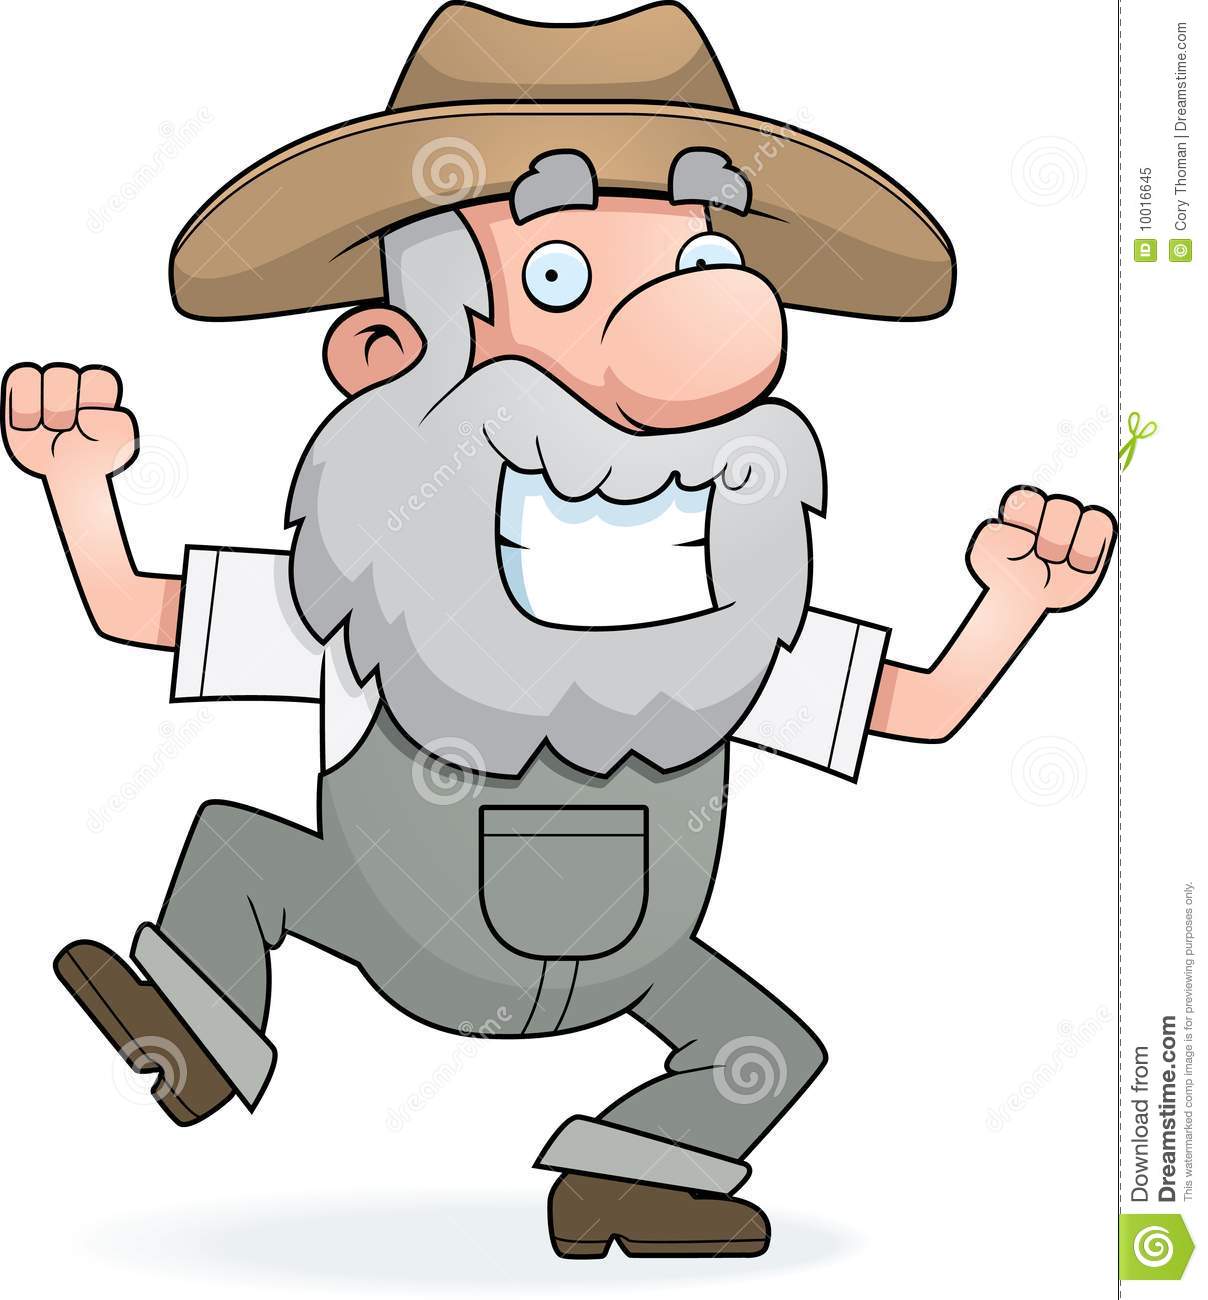 Prospector Dancing Royalty Free Stock Photo   Image  10016645